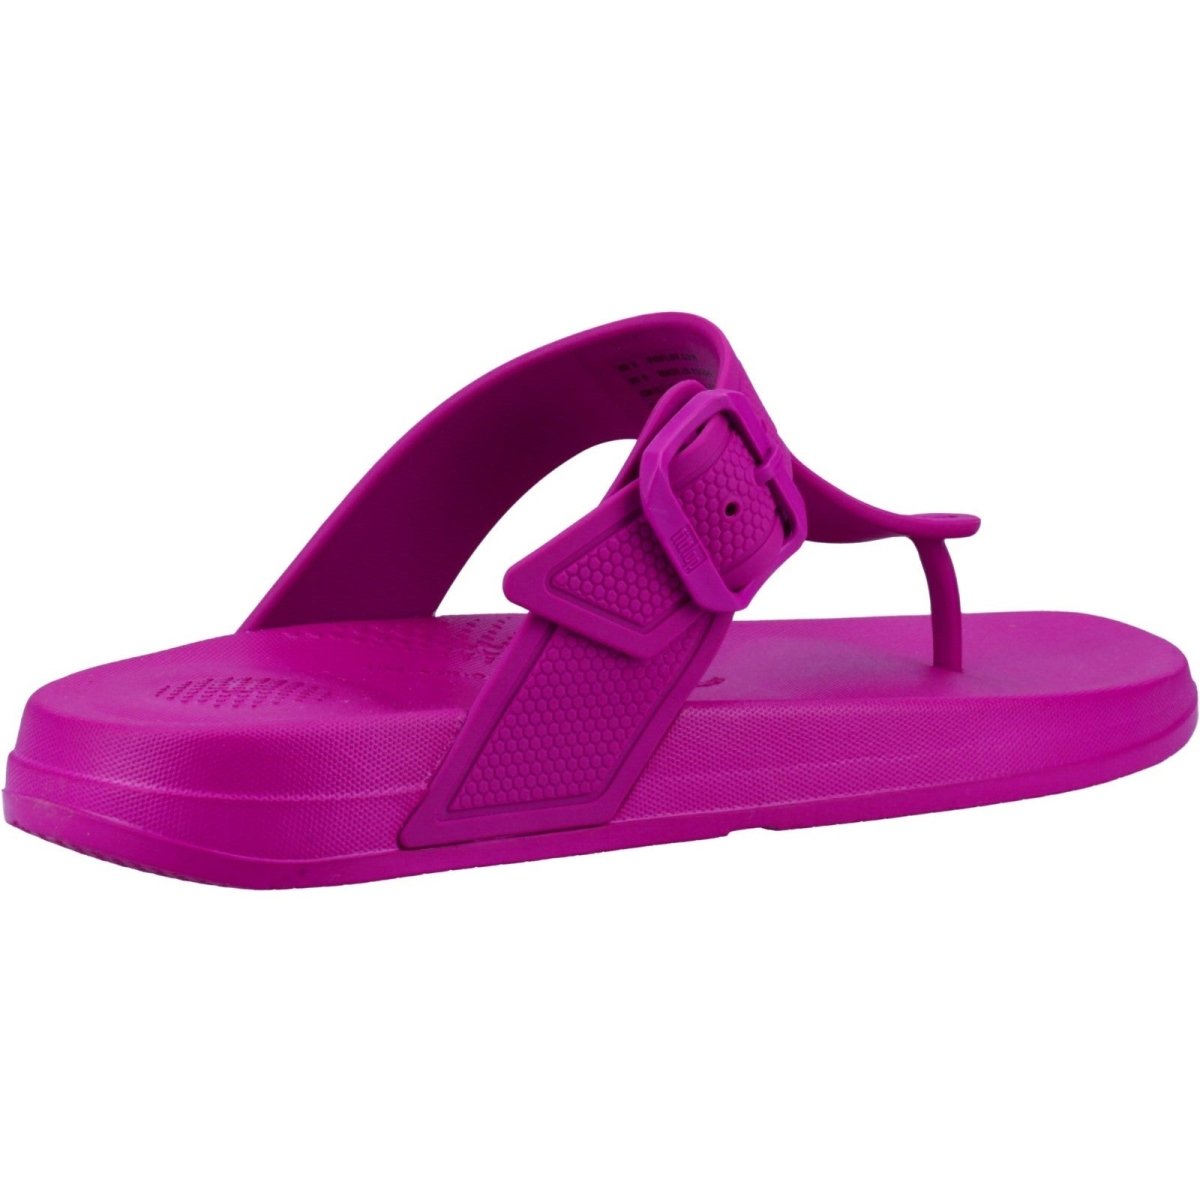 Fitflop iQUSHION Ladies Adjustable Buckle Toe Post Flip-Flops - Shoe Store Direct